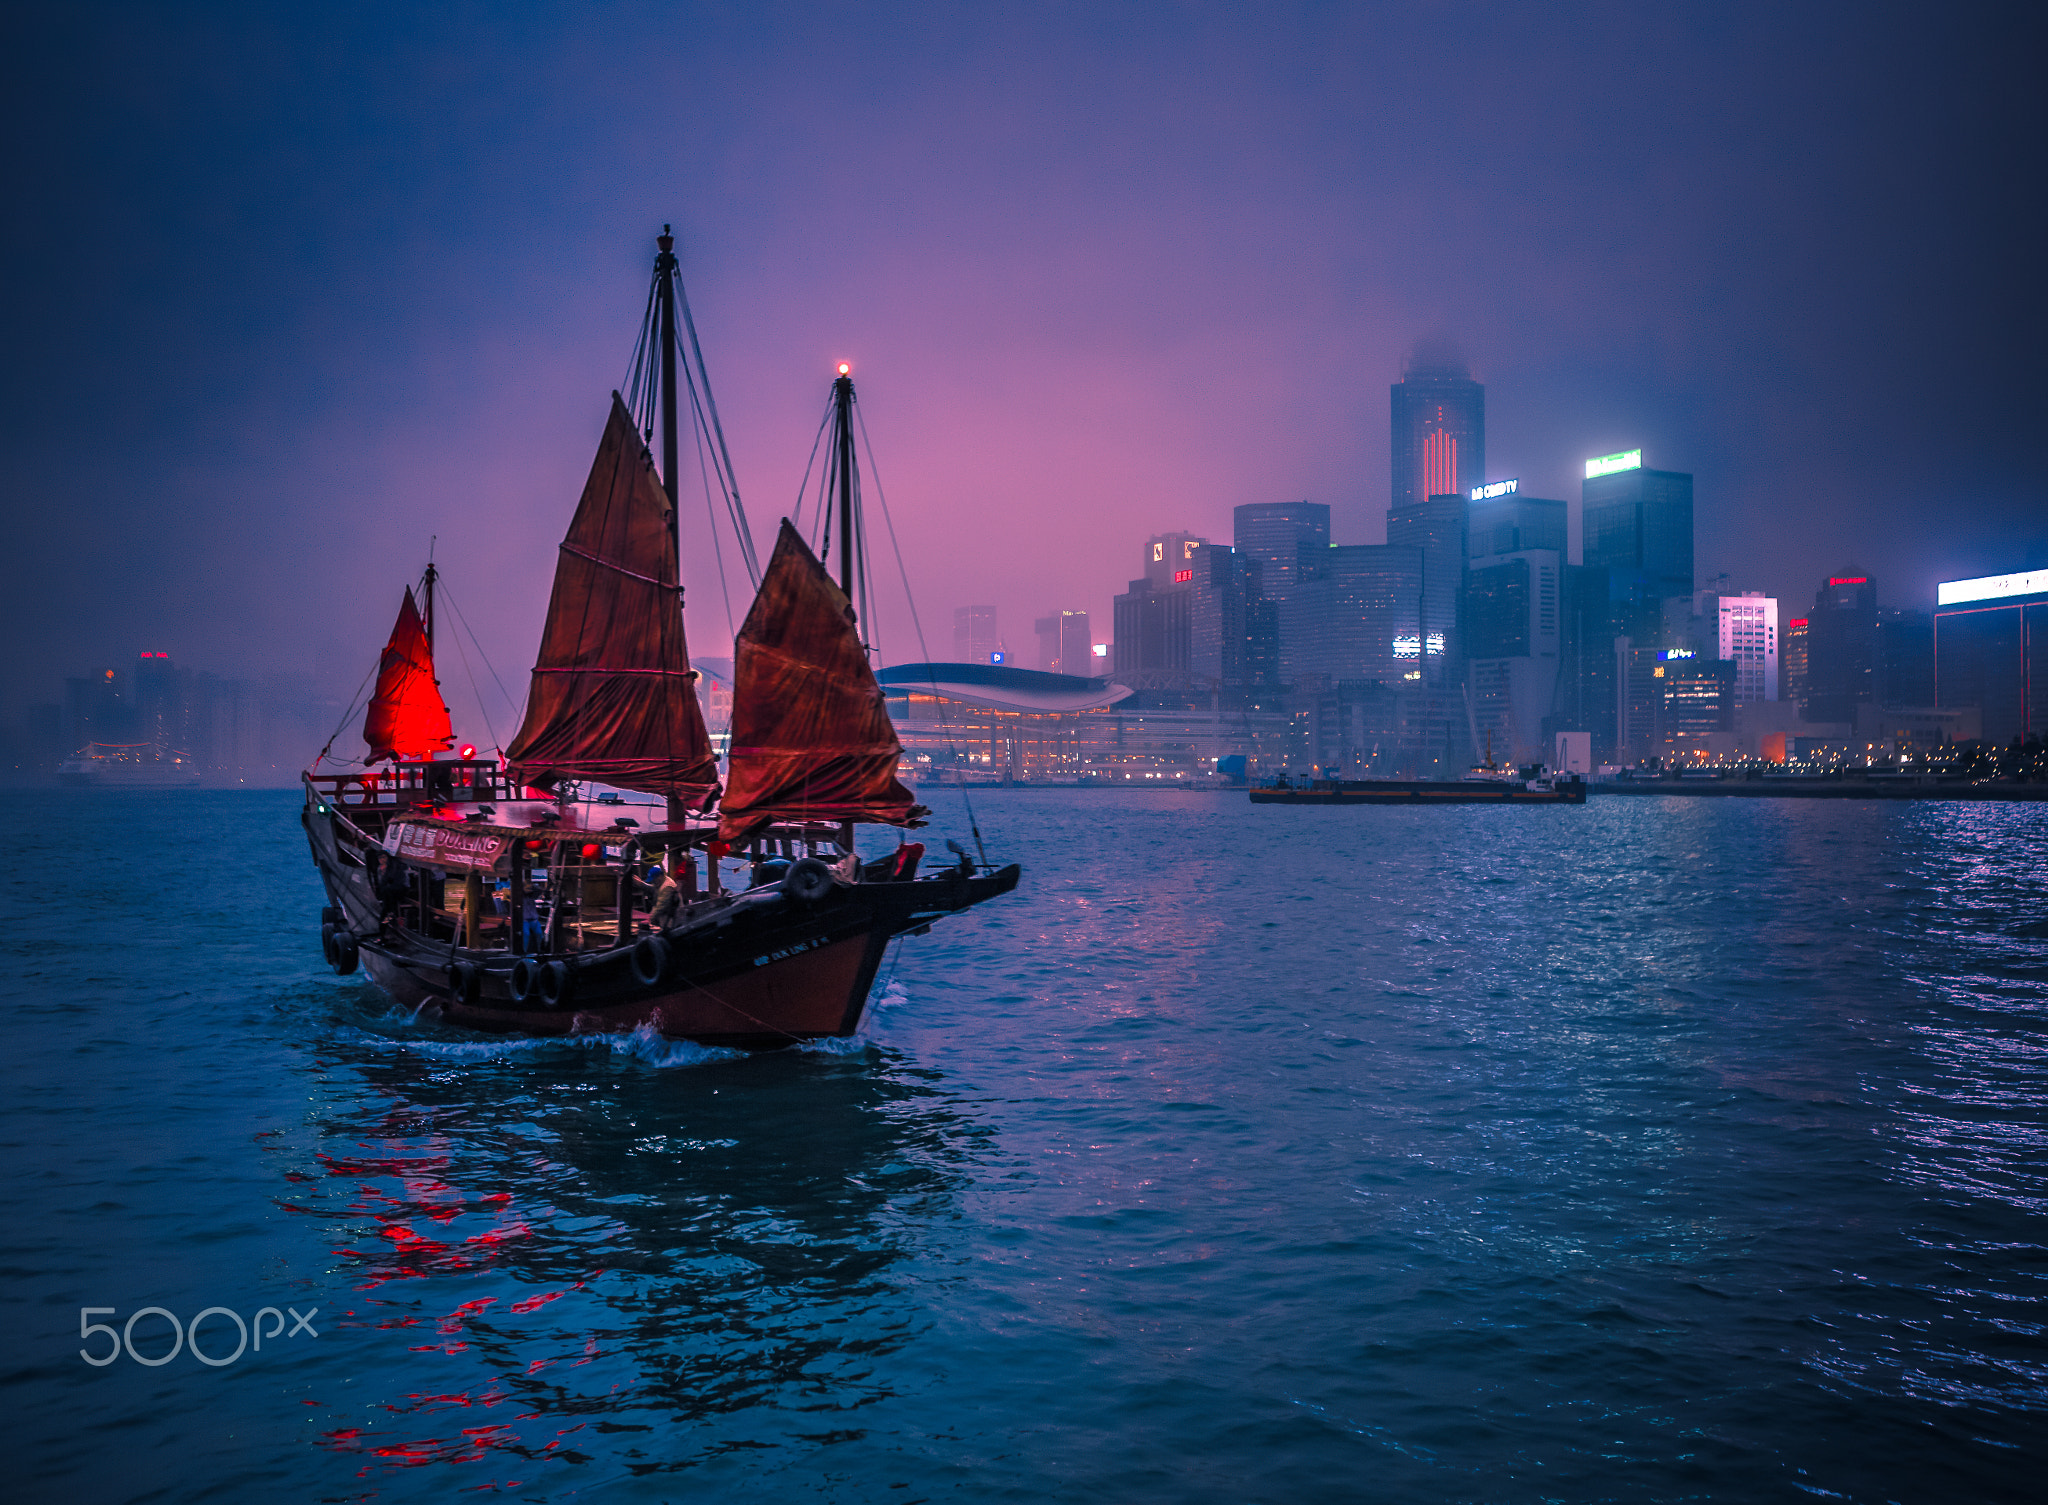 Foggy evening on Victoria Harbour